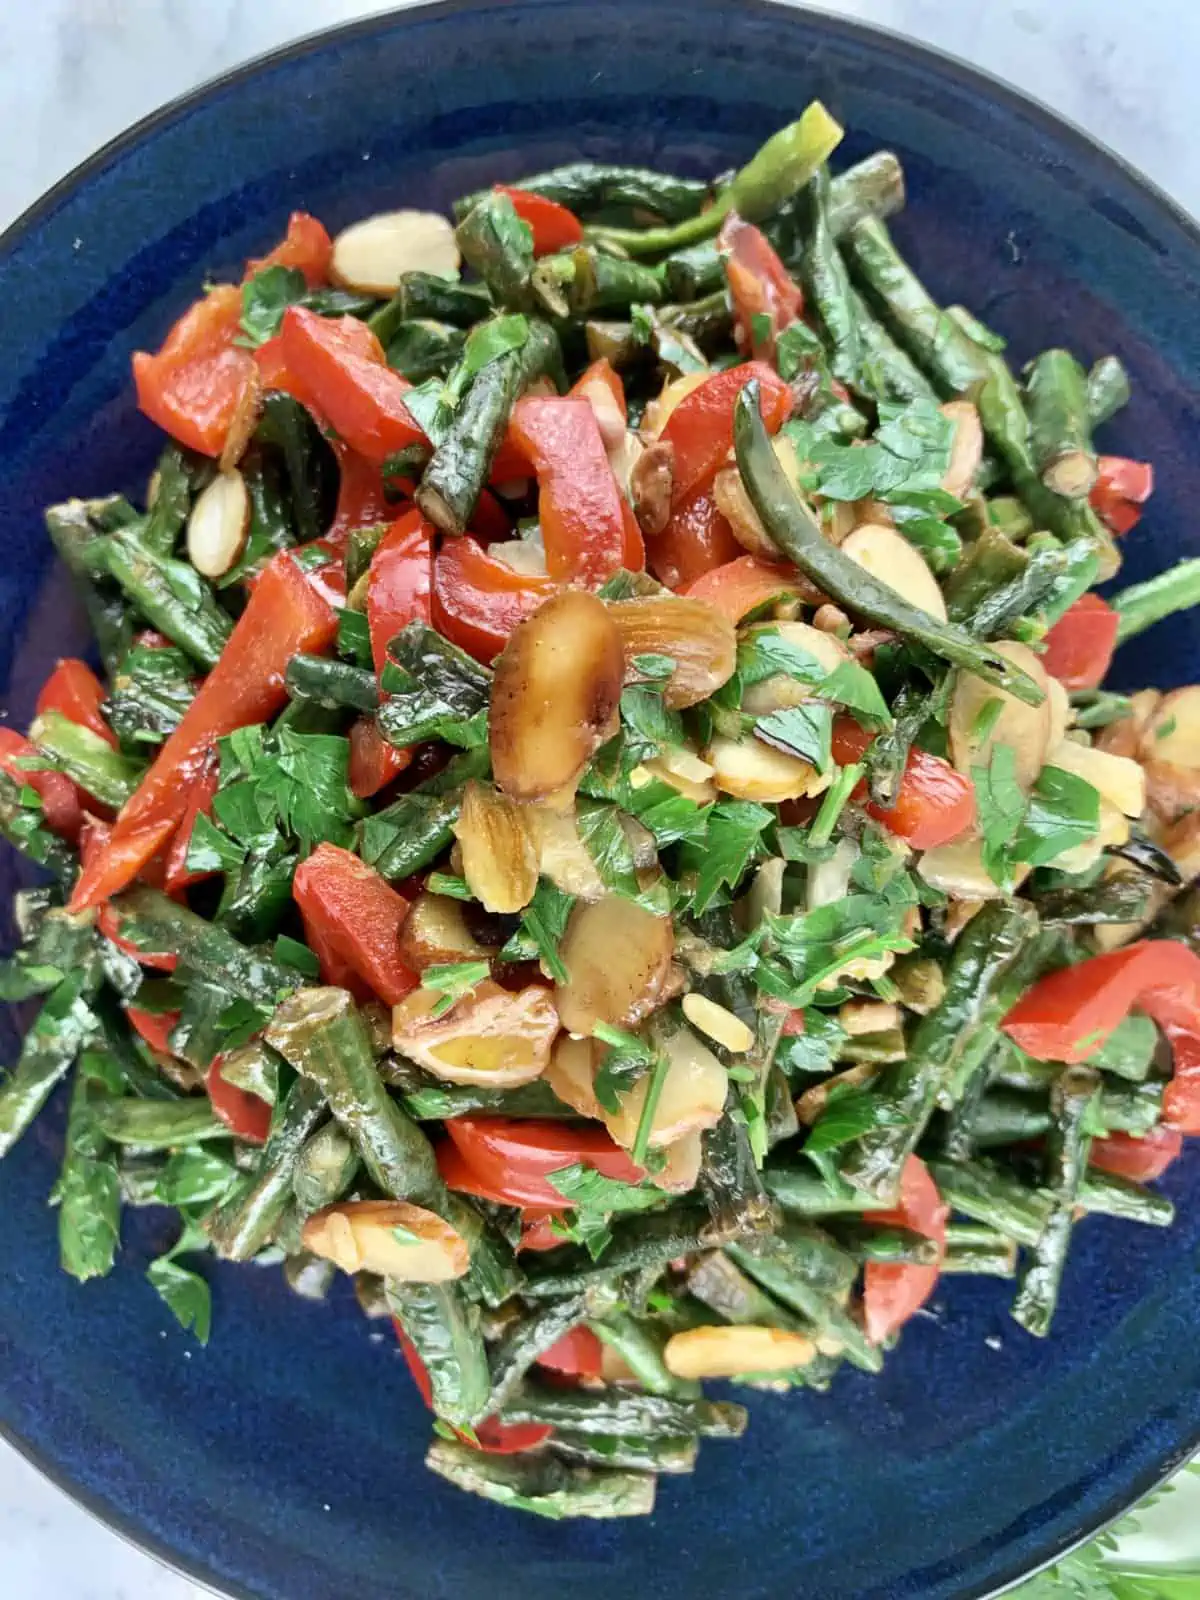 A close-up of Snake Bean Salad with Red Peppers and Almonds on a blue plate.